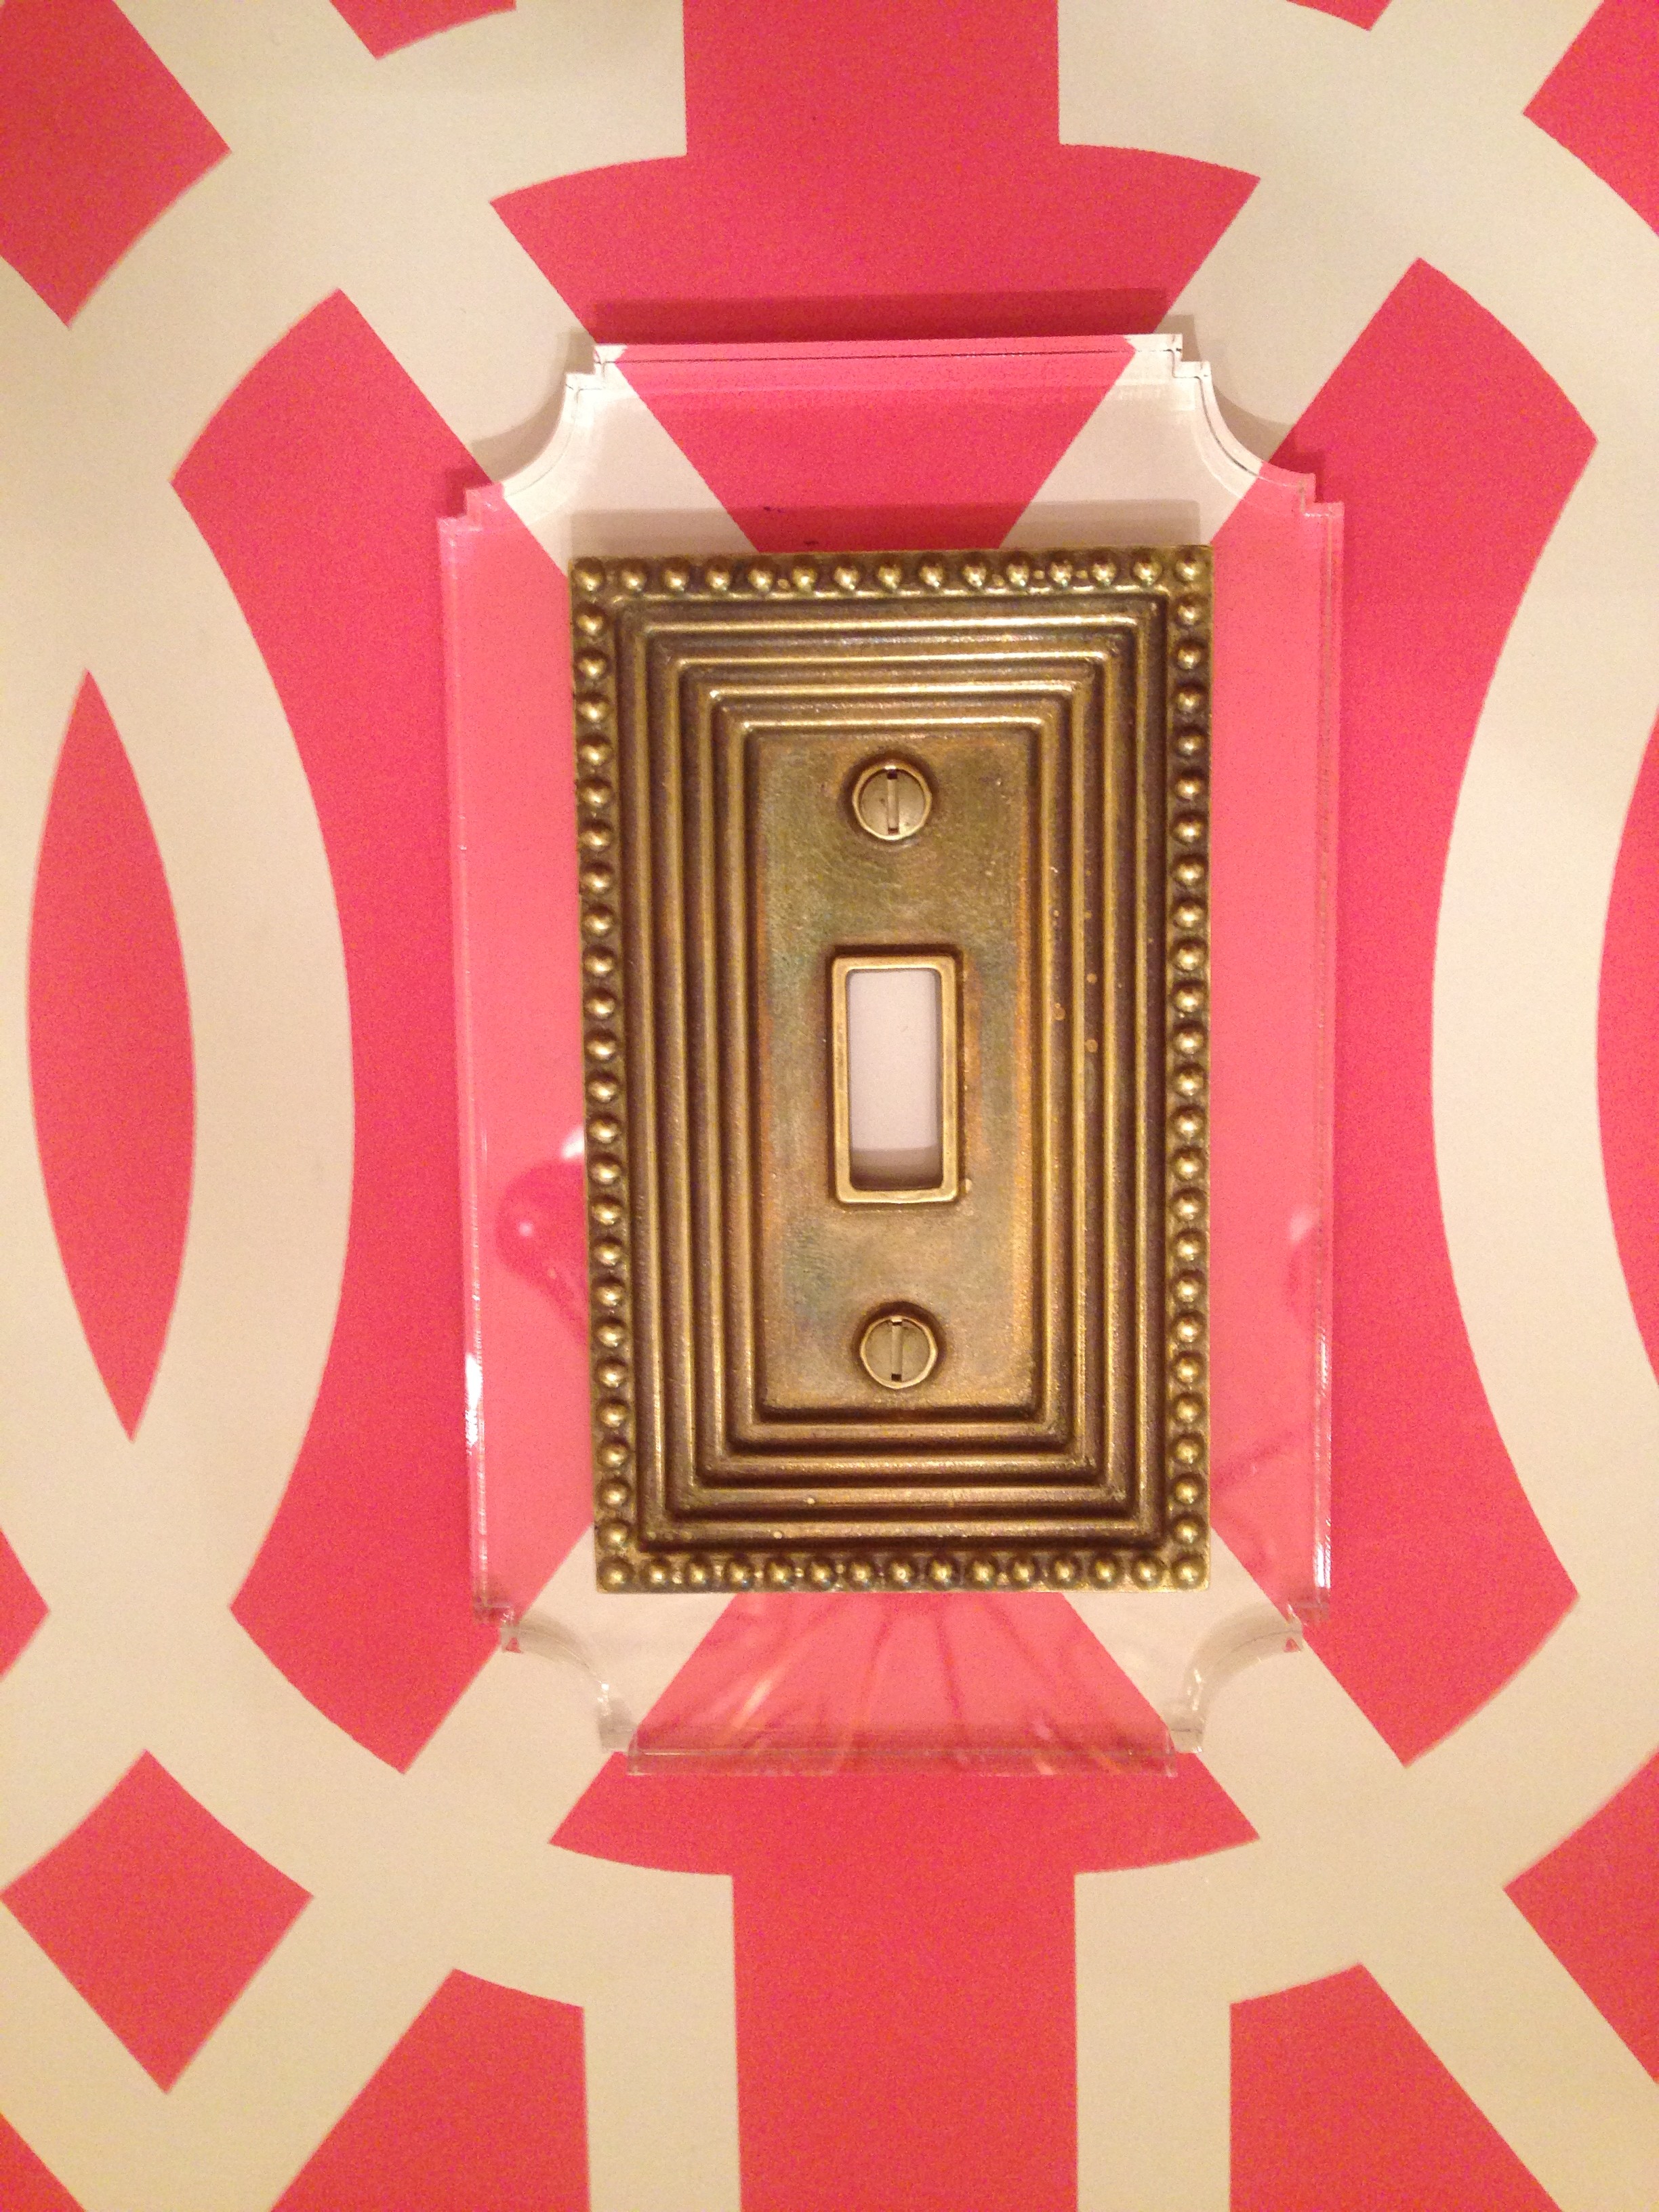 SNEAK PEEK: Switch Plates from Reprotique | The English Room